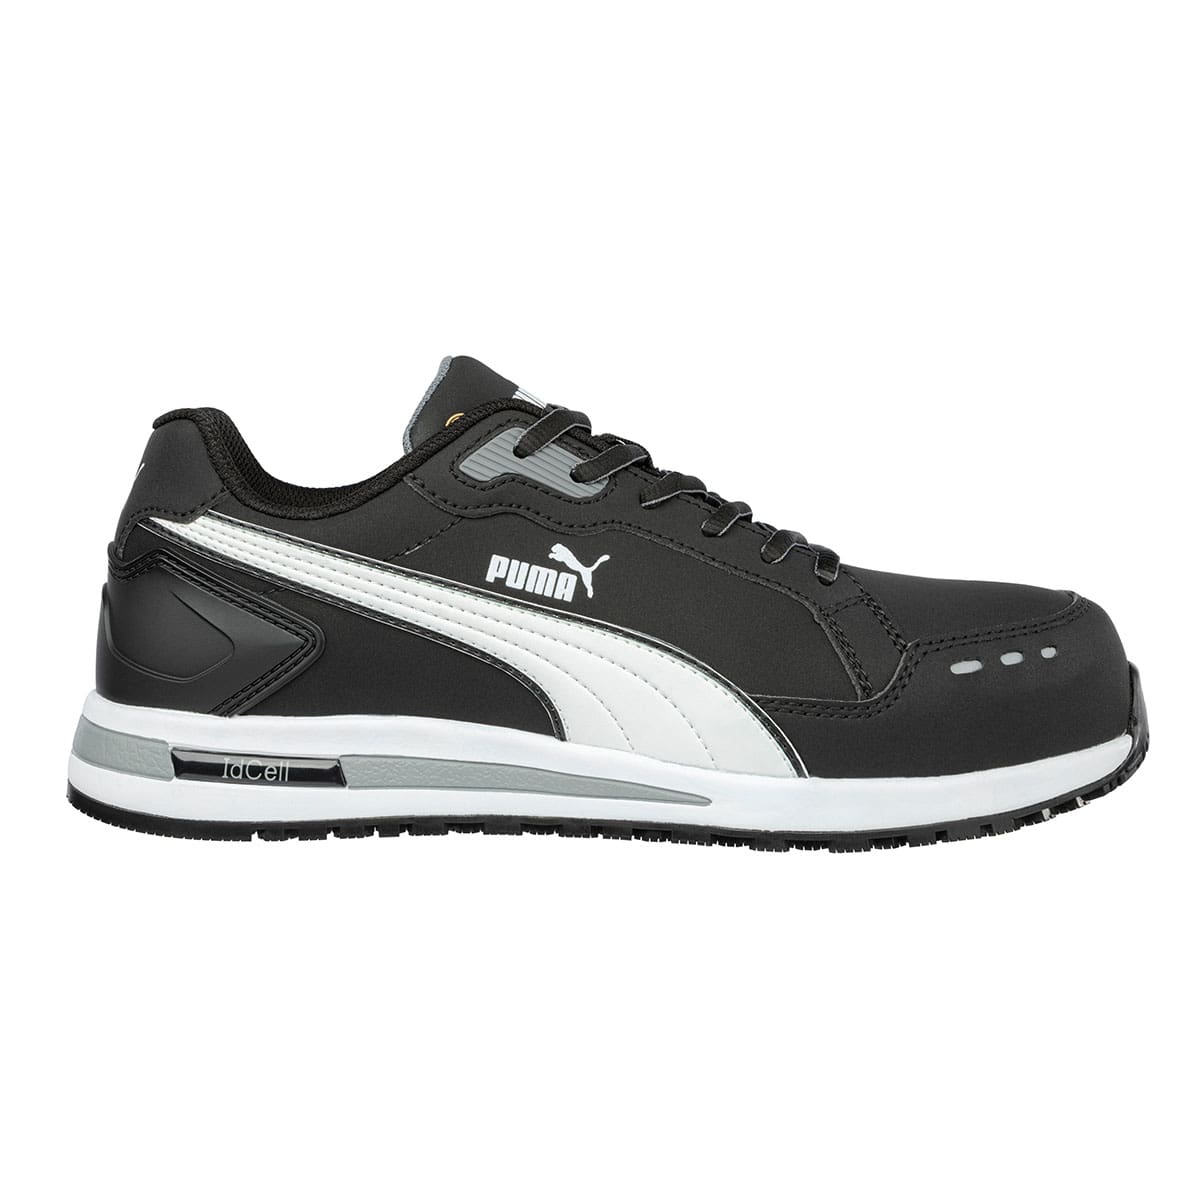 Black slip resistant shoe with composite toe cap (200 joules), side view with Puma logo.